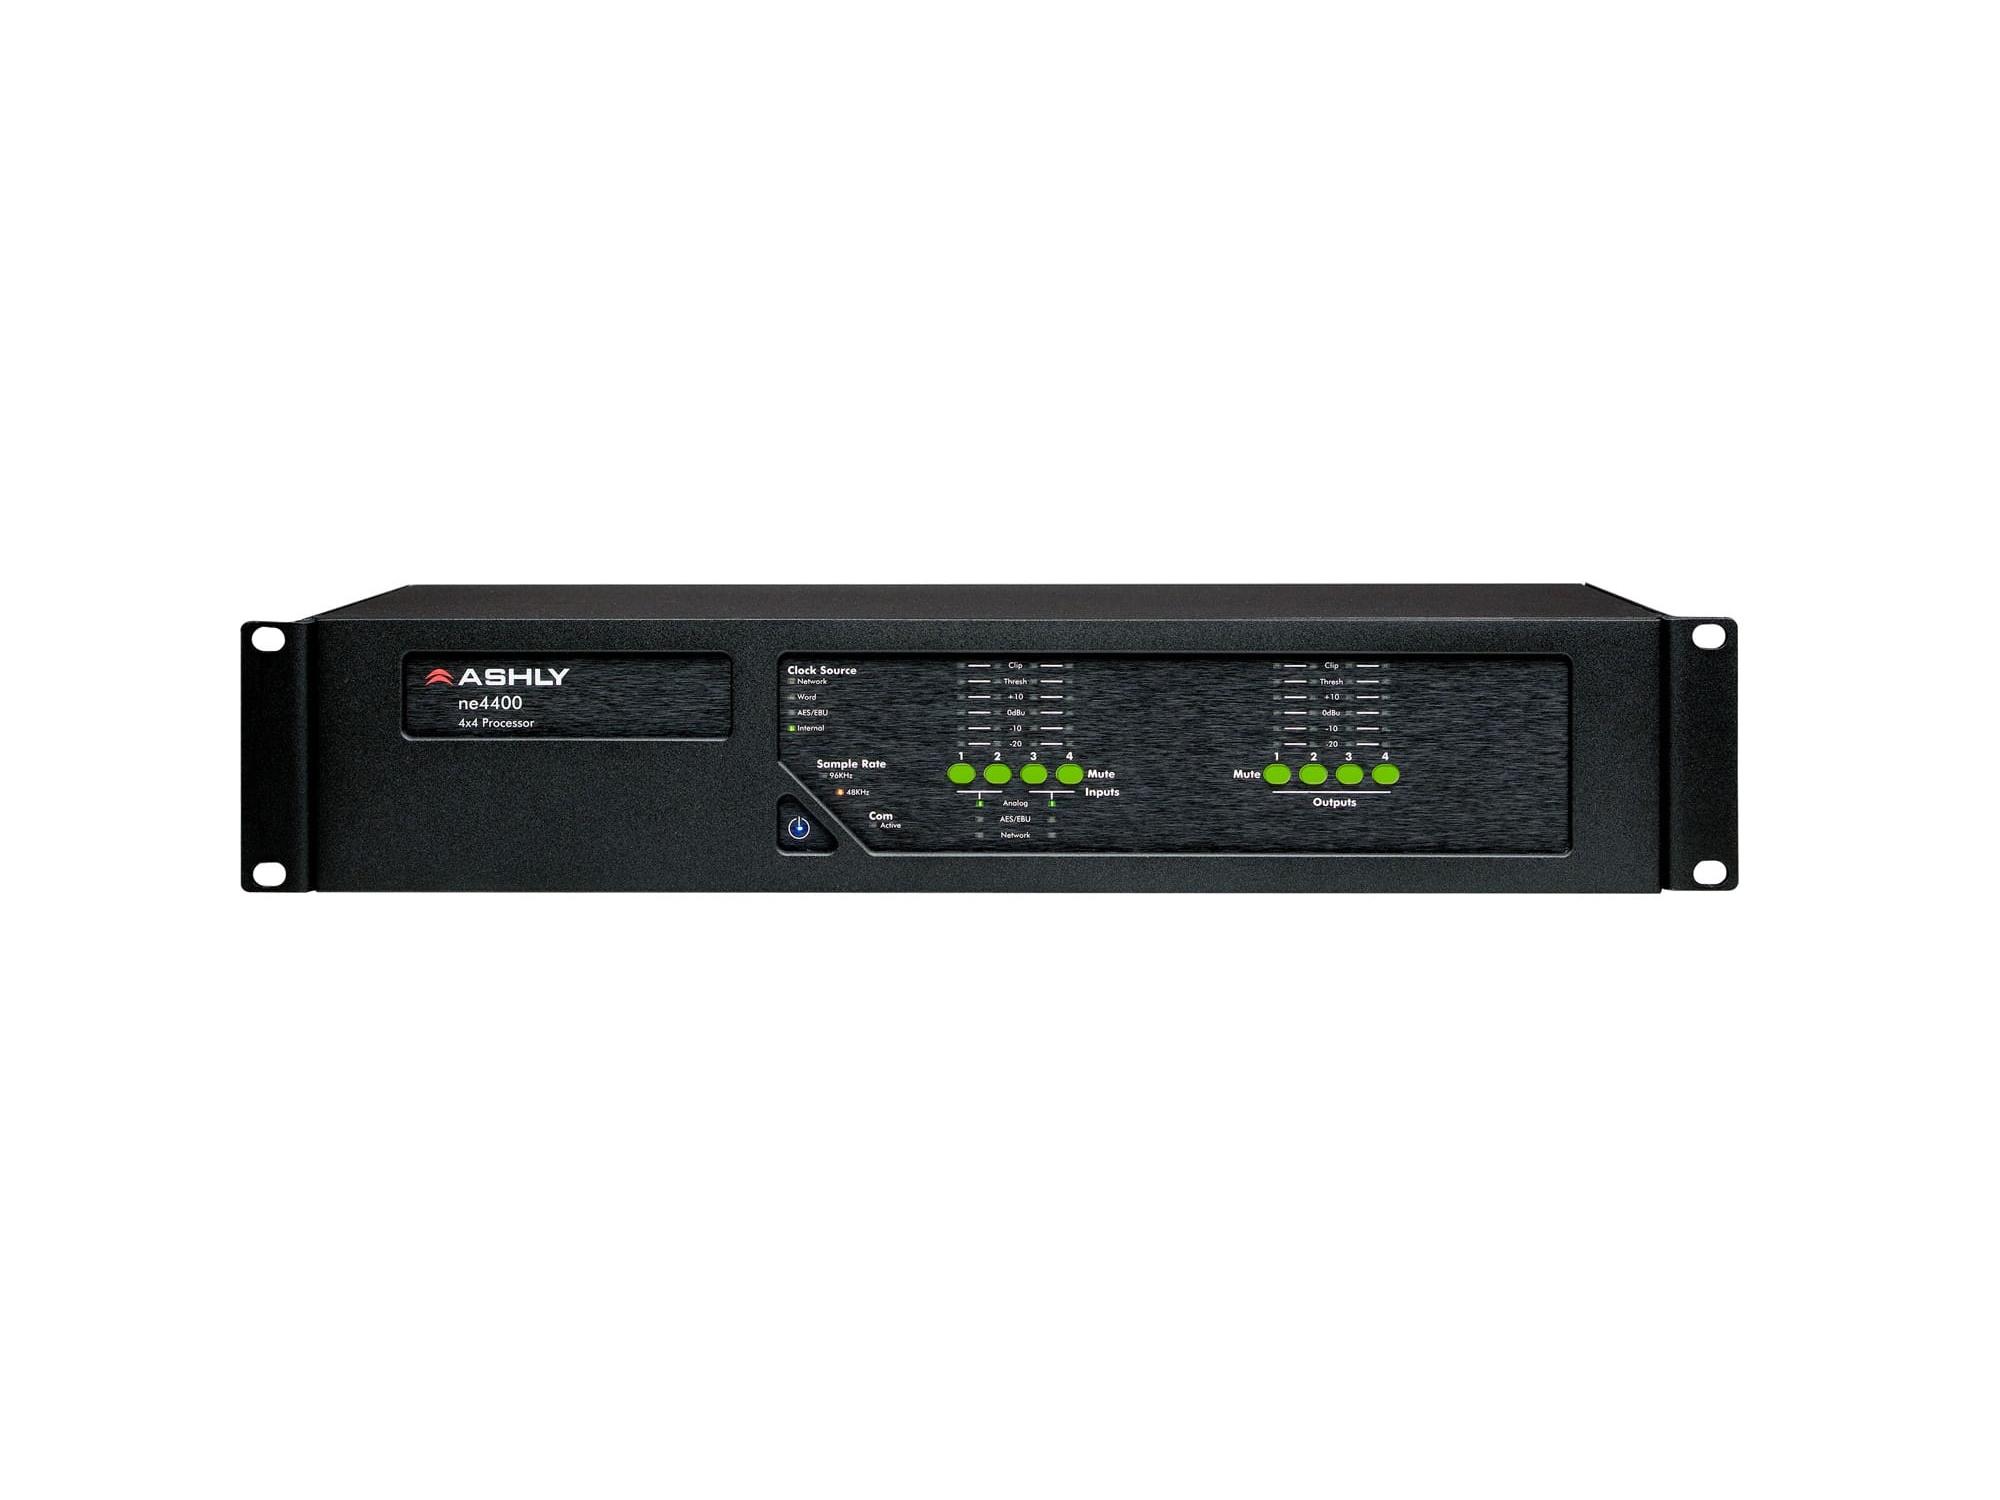 Ashly ne4400ms Network Enabled Digital Signal Processor with Mic Input and AES Output Options